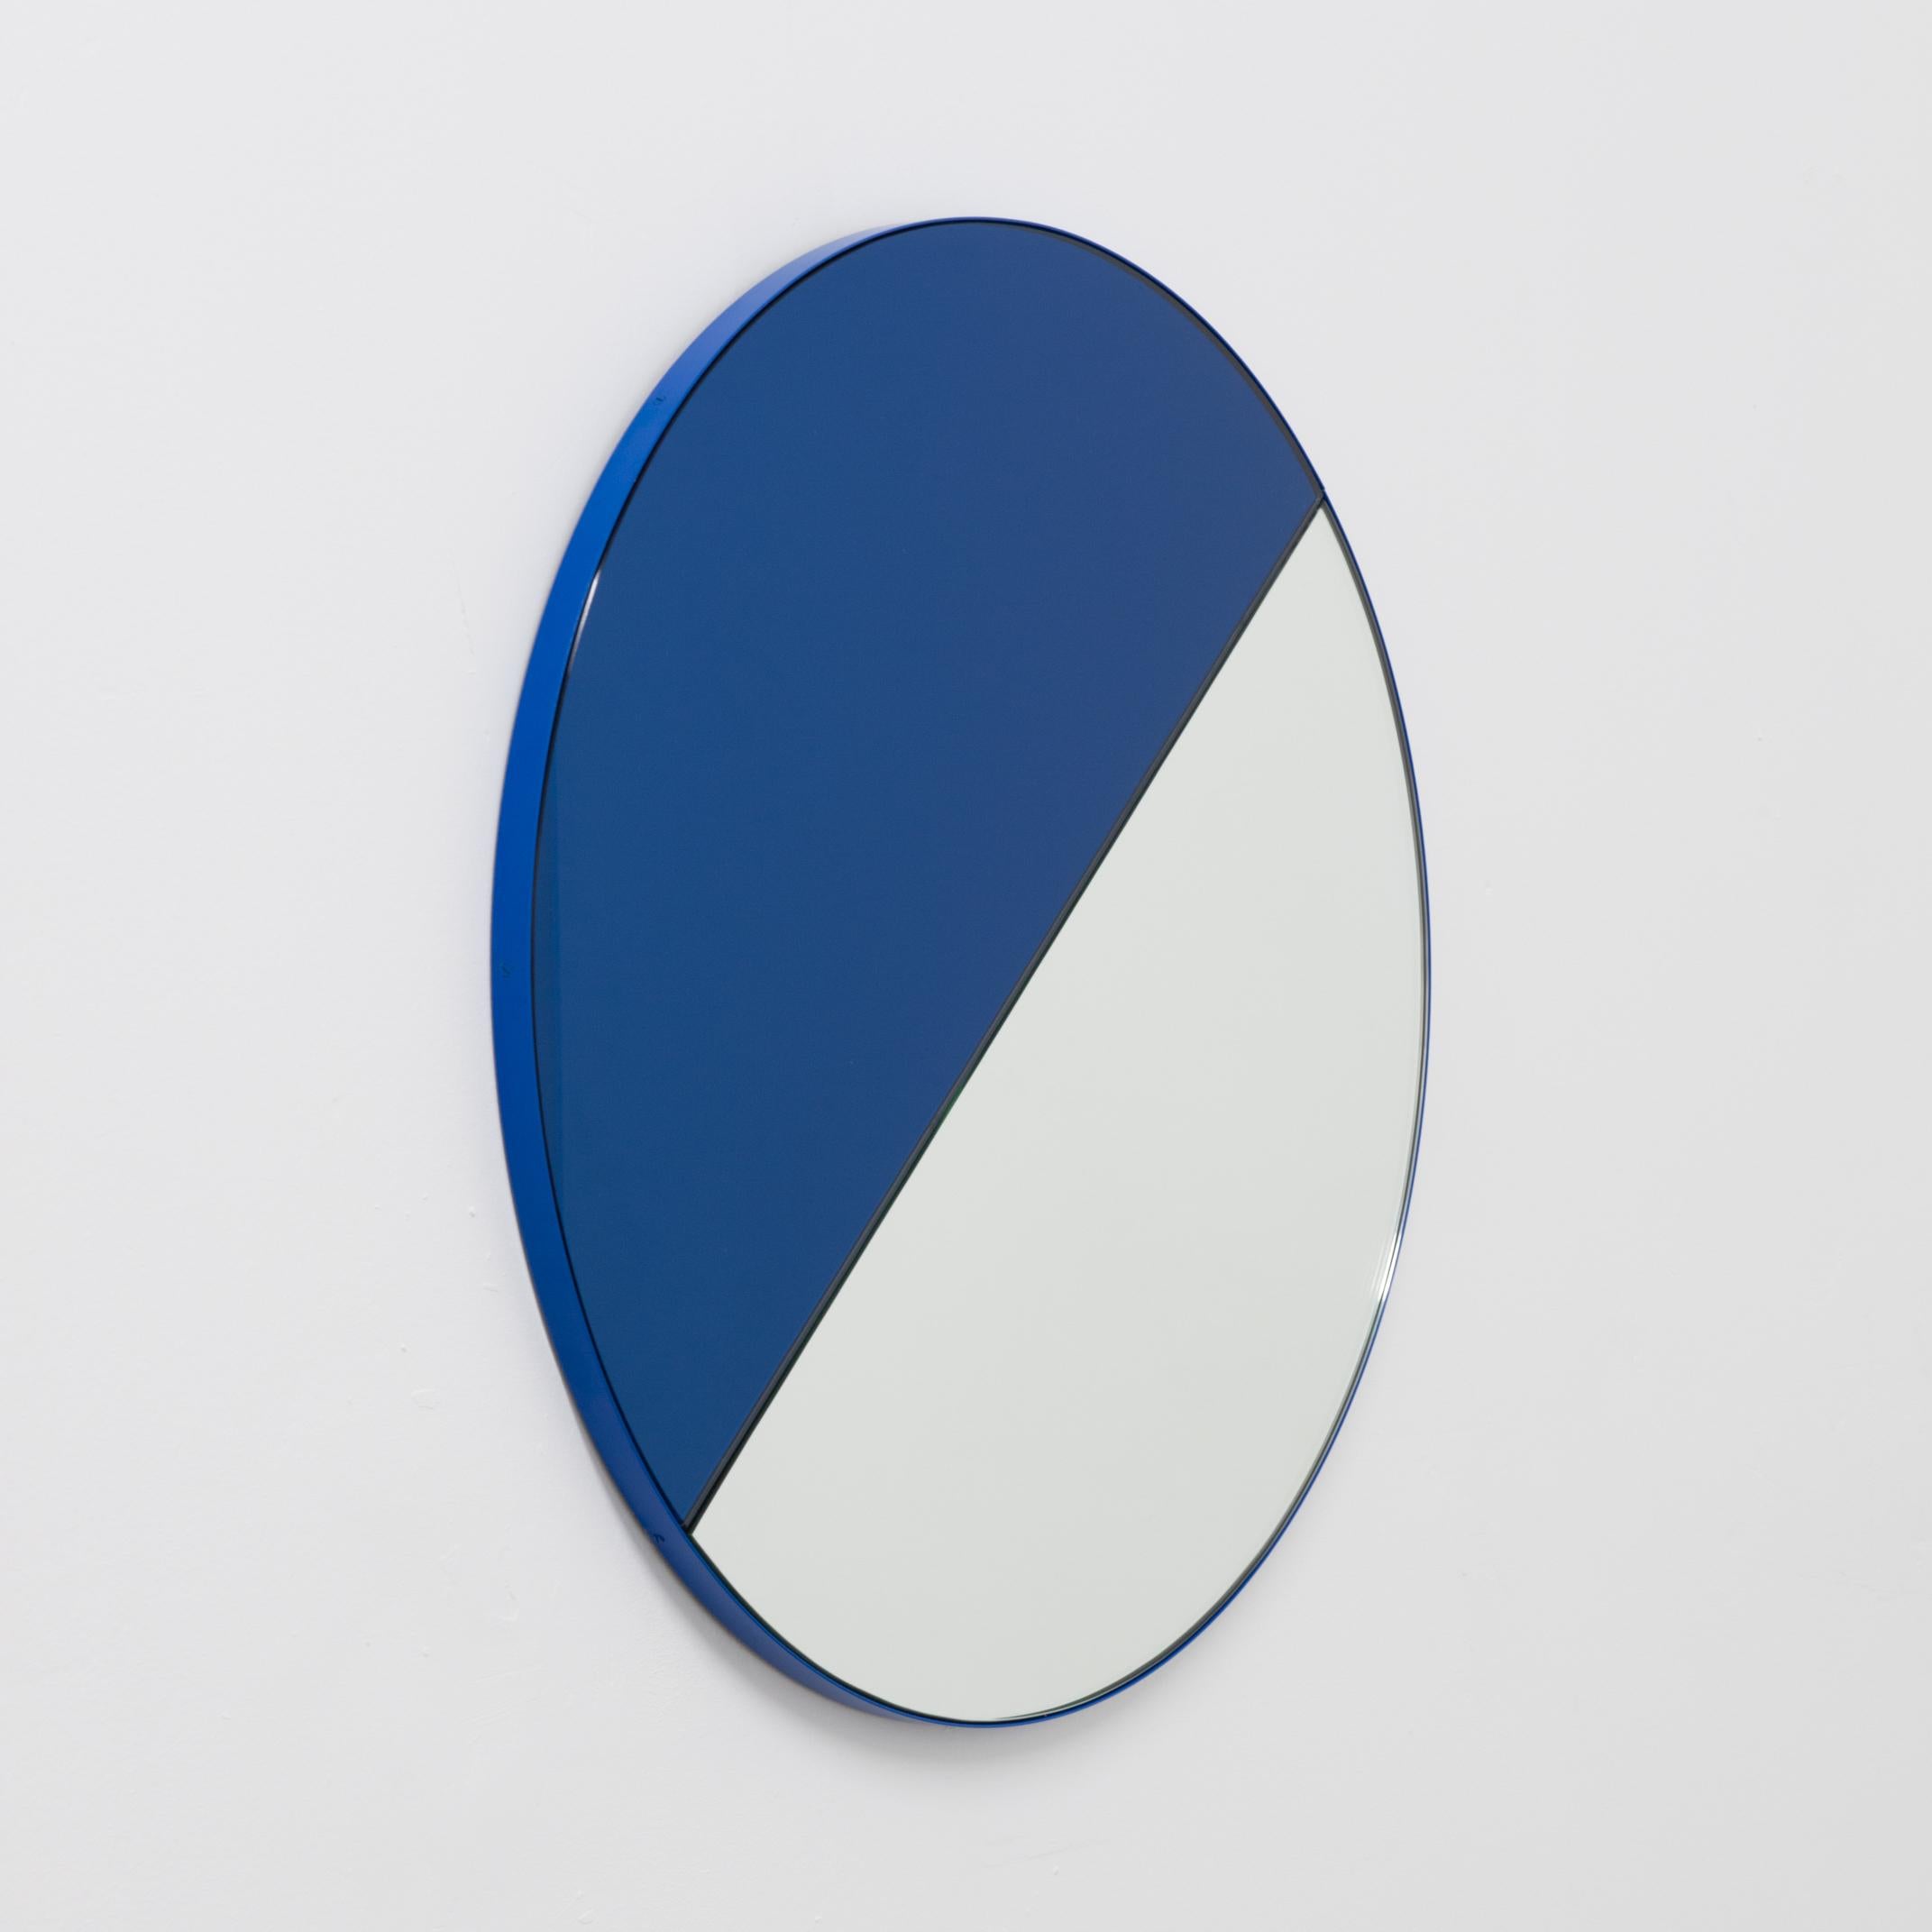 Aluminum In Stock Orbis Dualis Blue and Silver Tint Round Mirror with Blue Frame, Medium For Sale